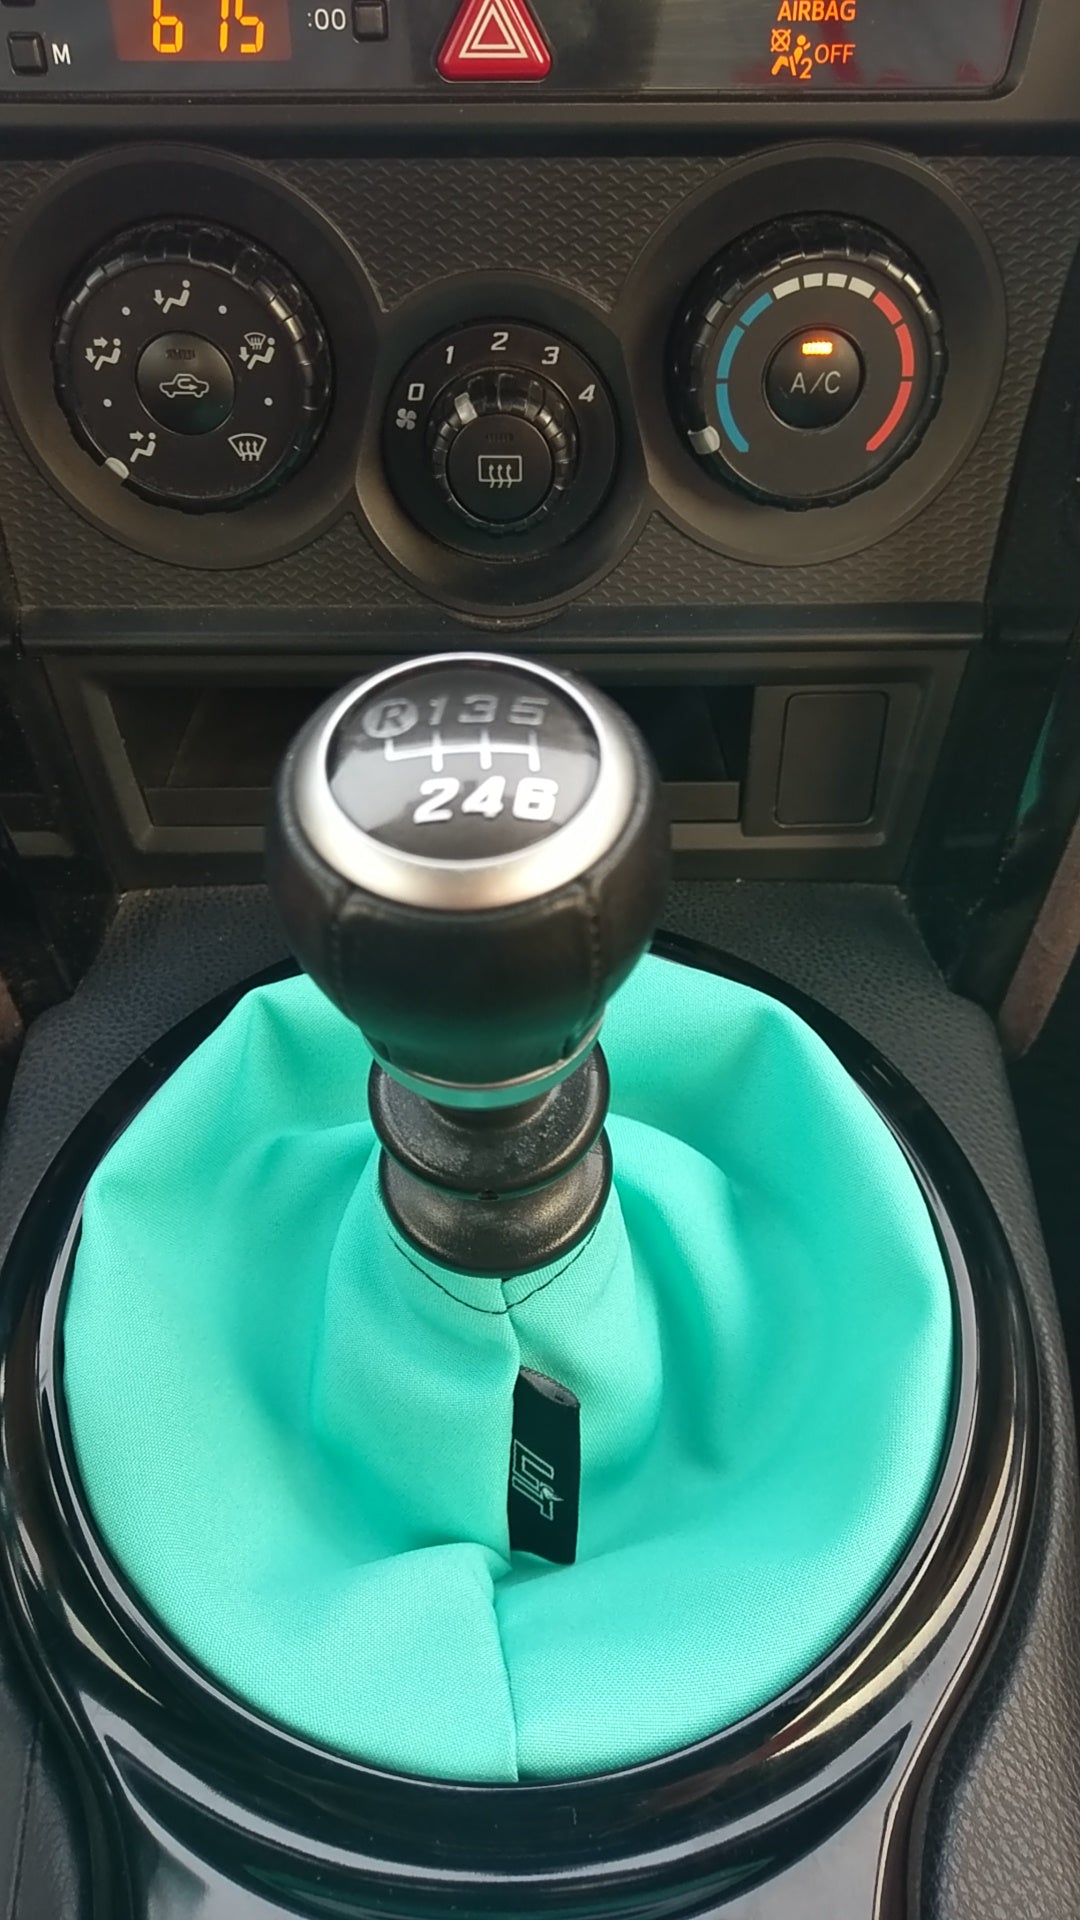 tiffany blue shift boot cover , teal blue shift boot cover , , nissan shift boot cover , subaru shift boot cover , toyota shift boot cover , schassis shift boot cover , nissan z shift boot cover , skyline shift boot cover , ford shift boot cover